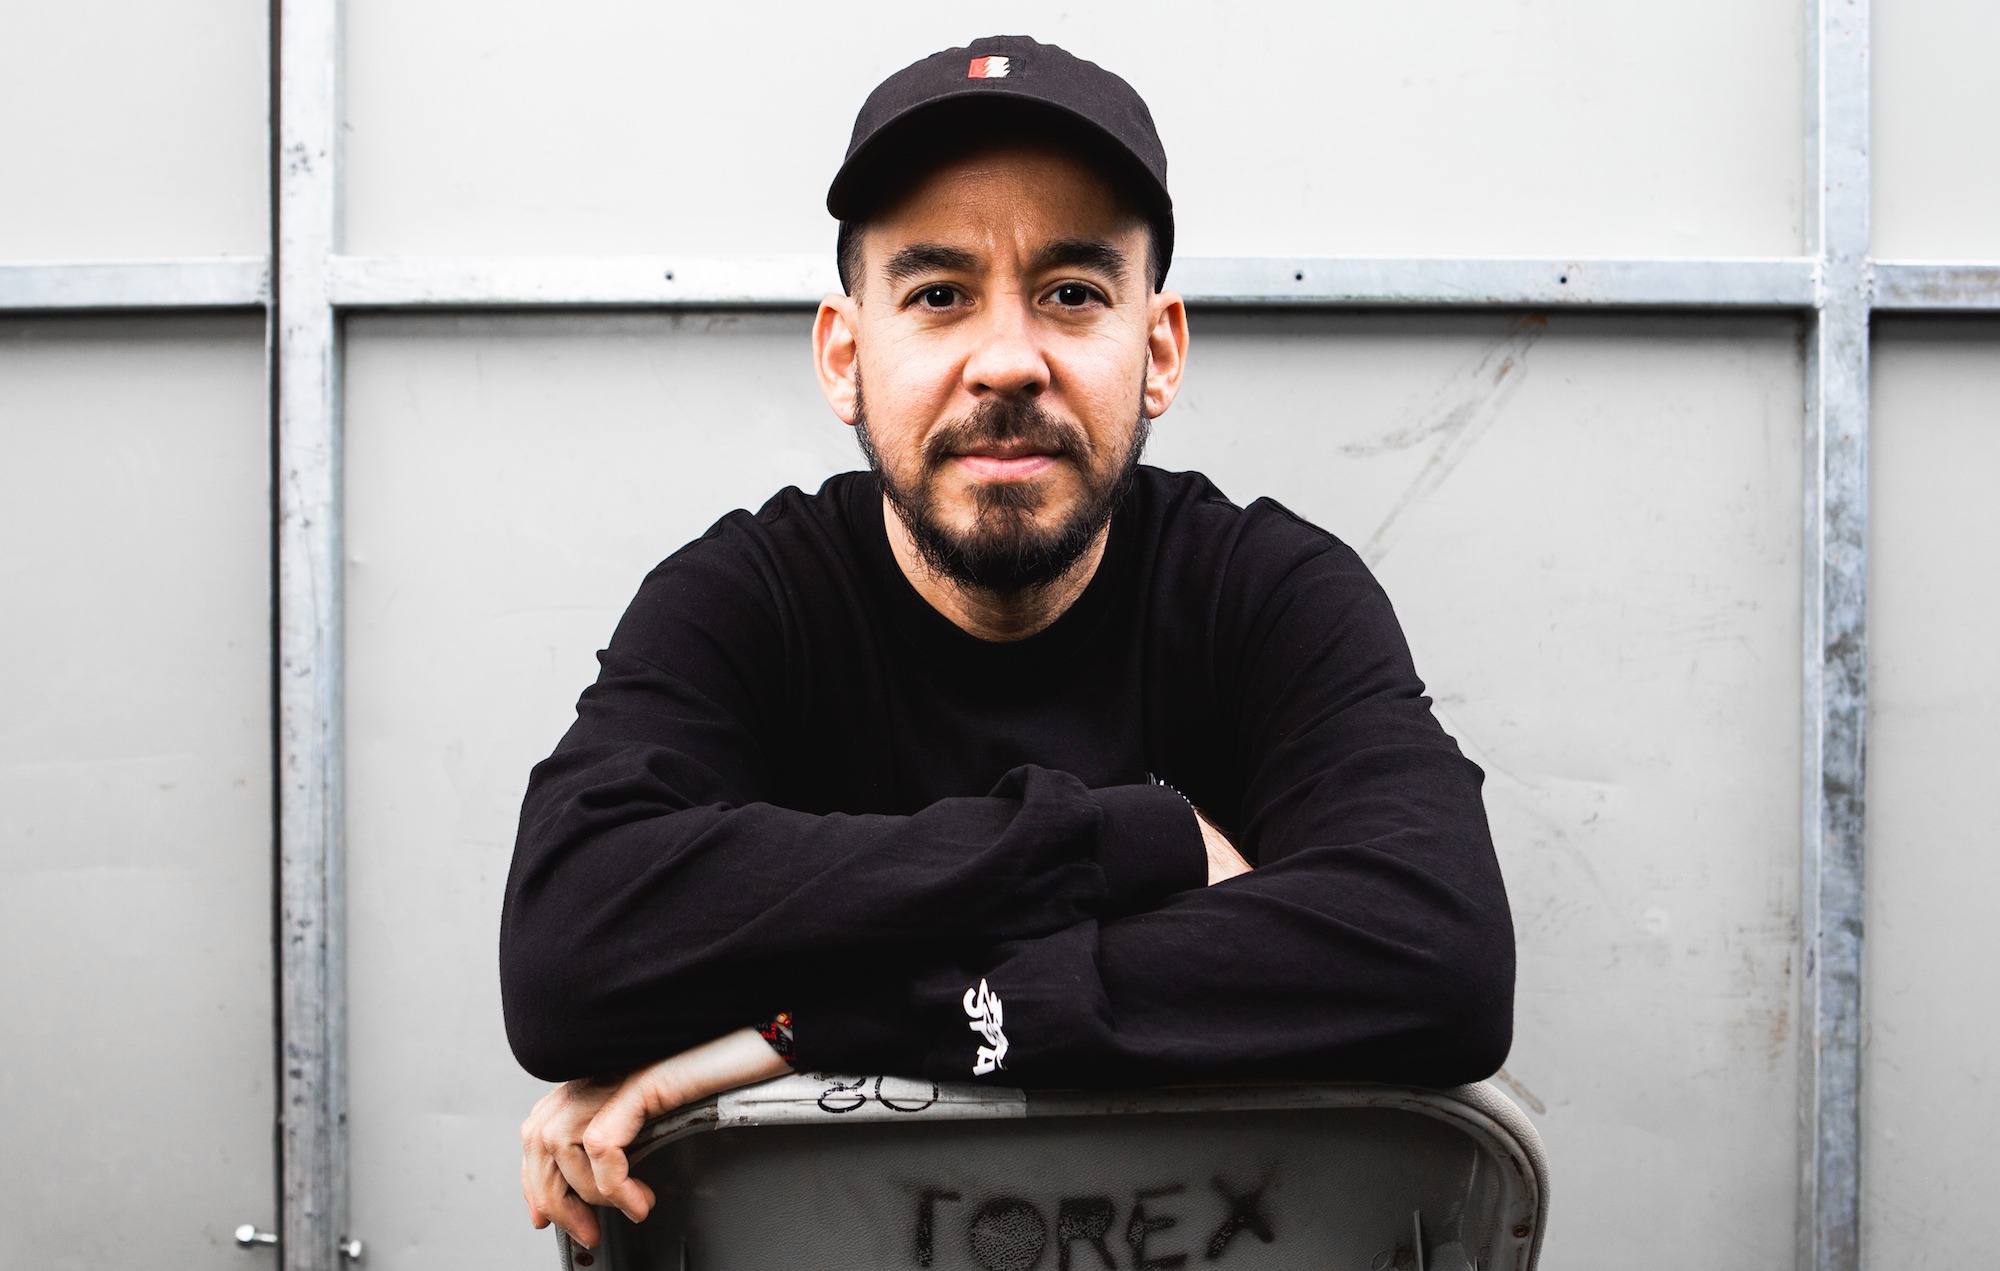 Mike Shinoda on writing an album on Twitch, 20 years of ‘Hybrid Theory’ and Chester Bennington’s voice